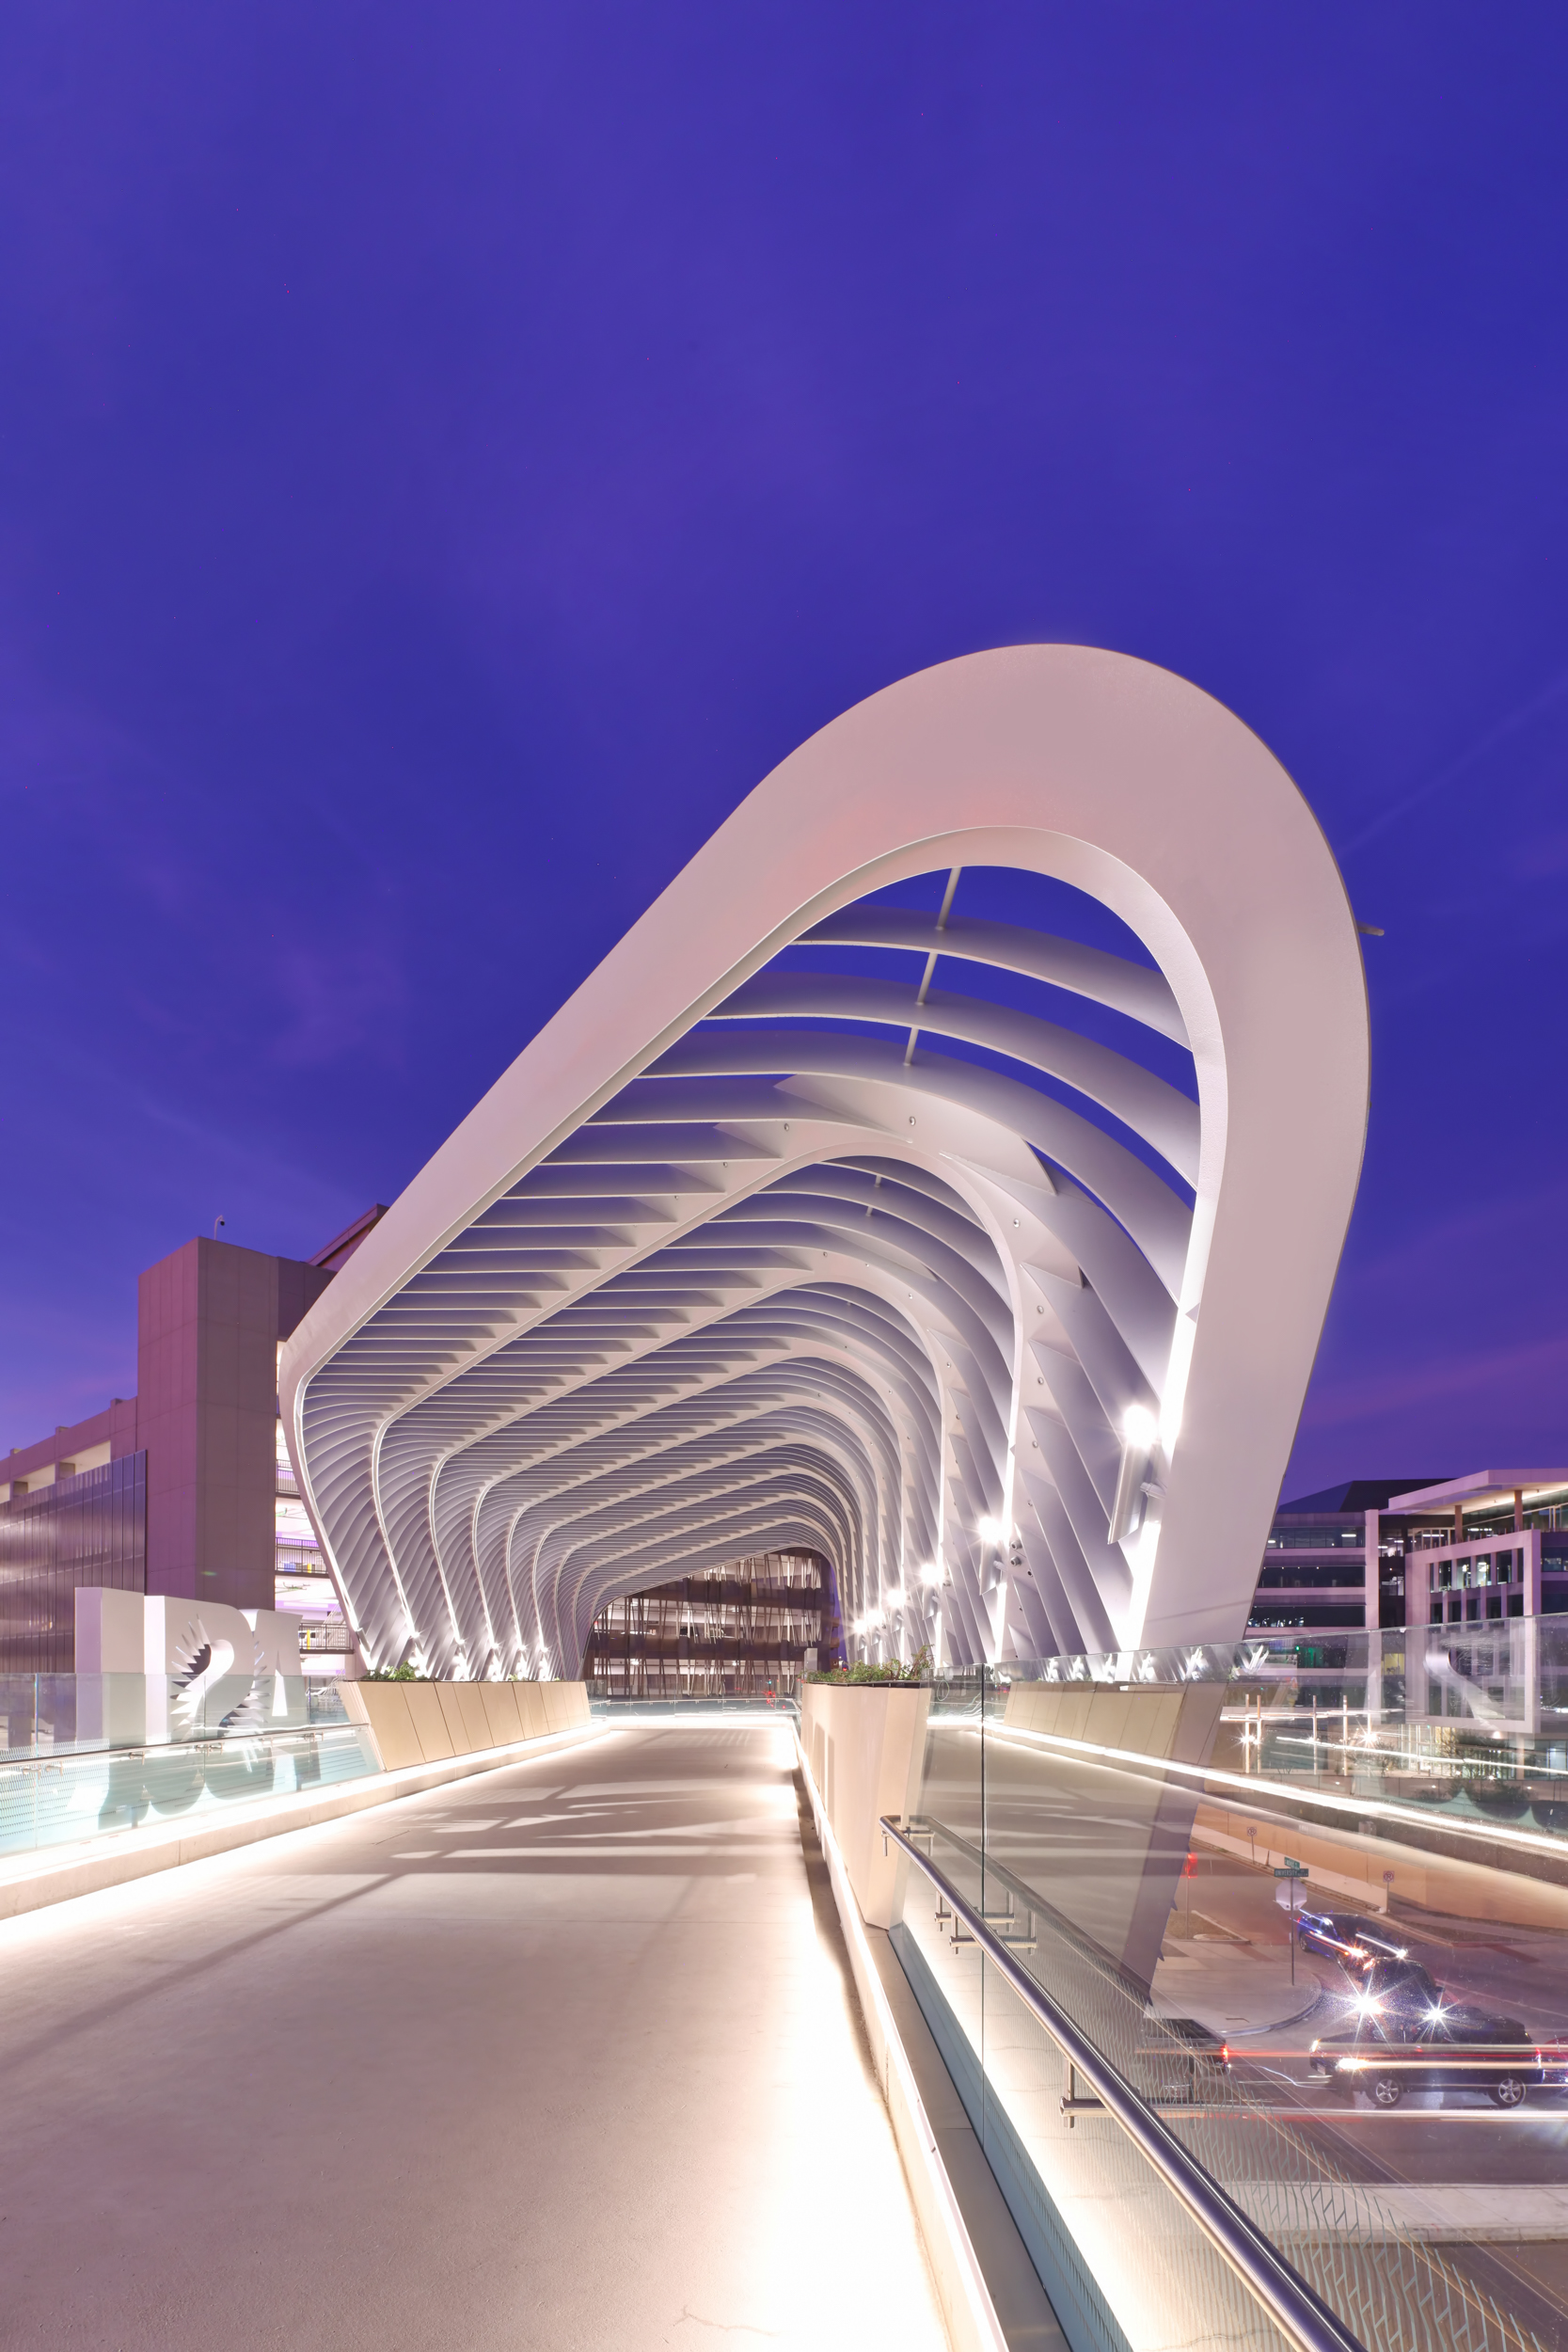 Modern bridge with a sleek, white, arching design and illuminated walkway at twilight, set against a purple sky.